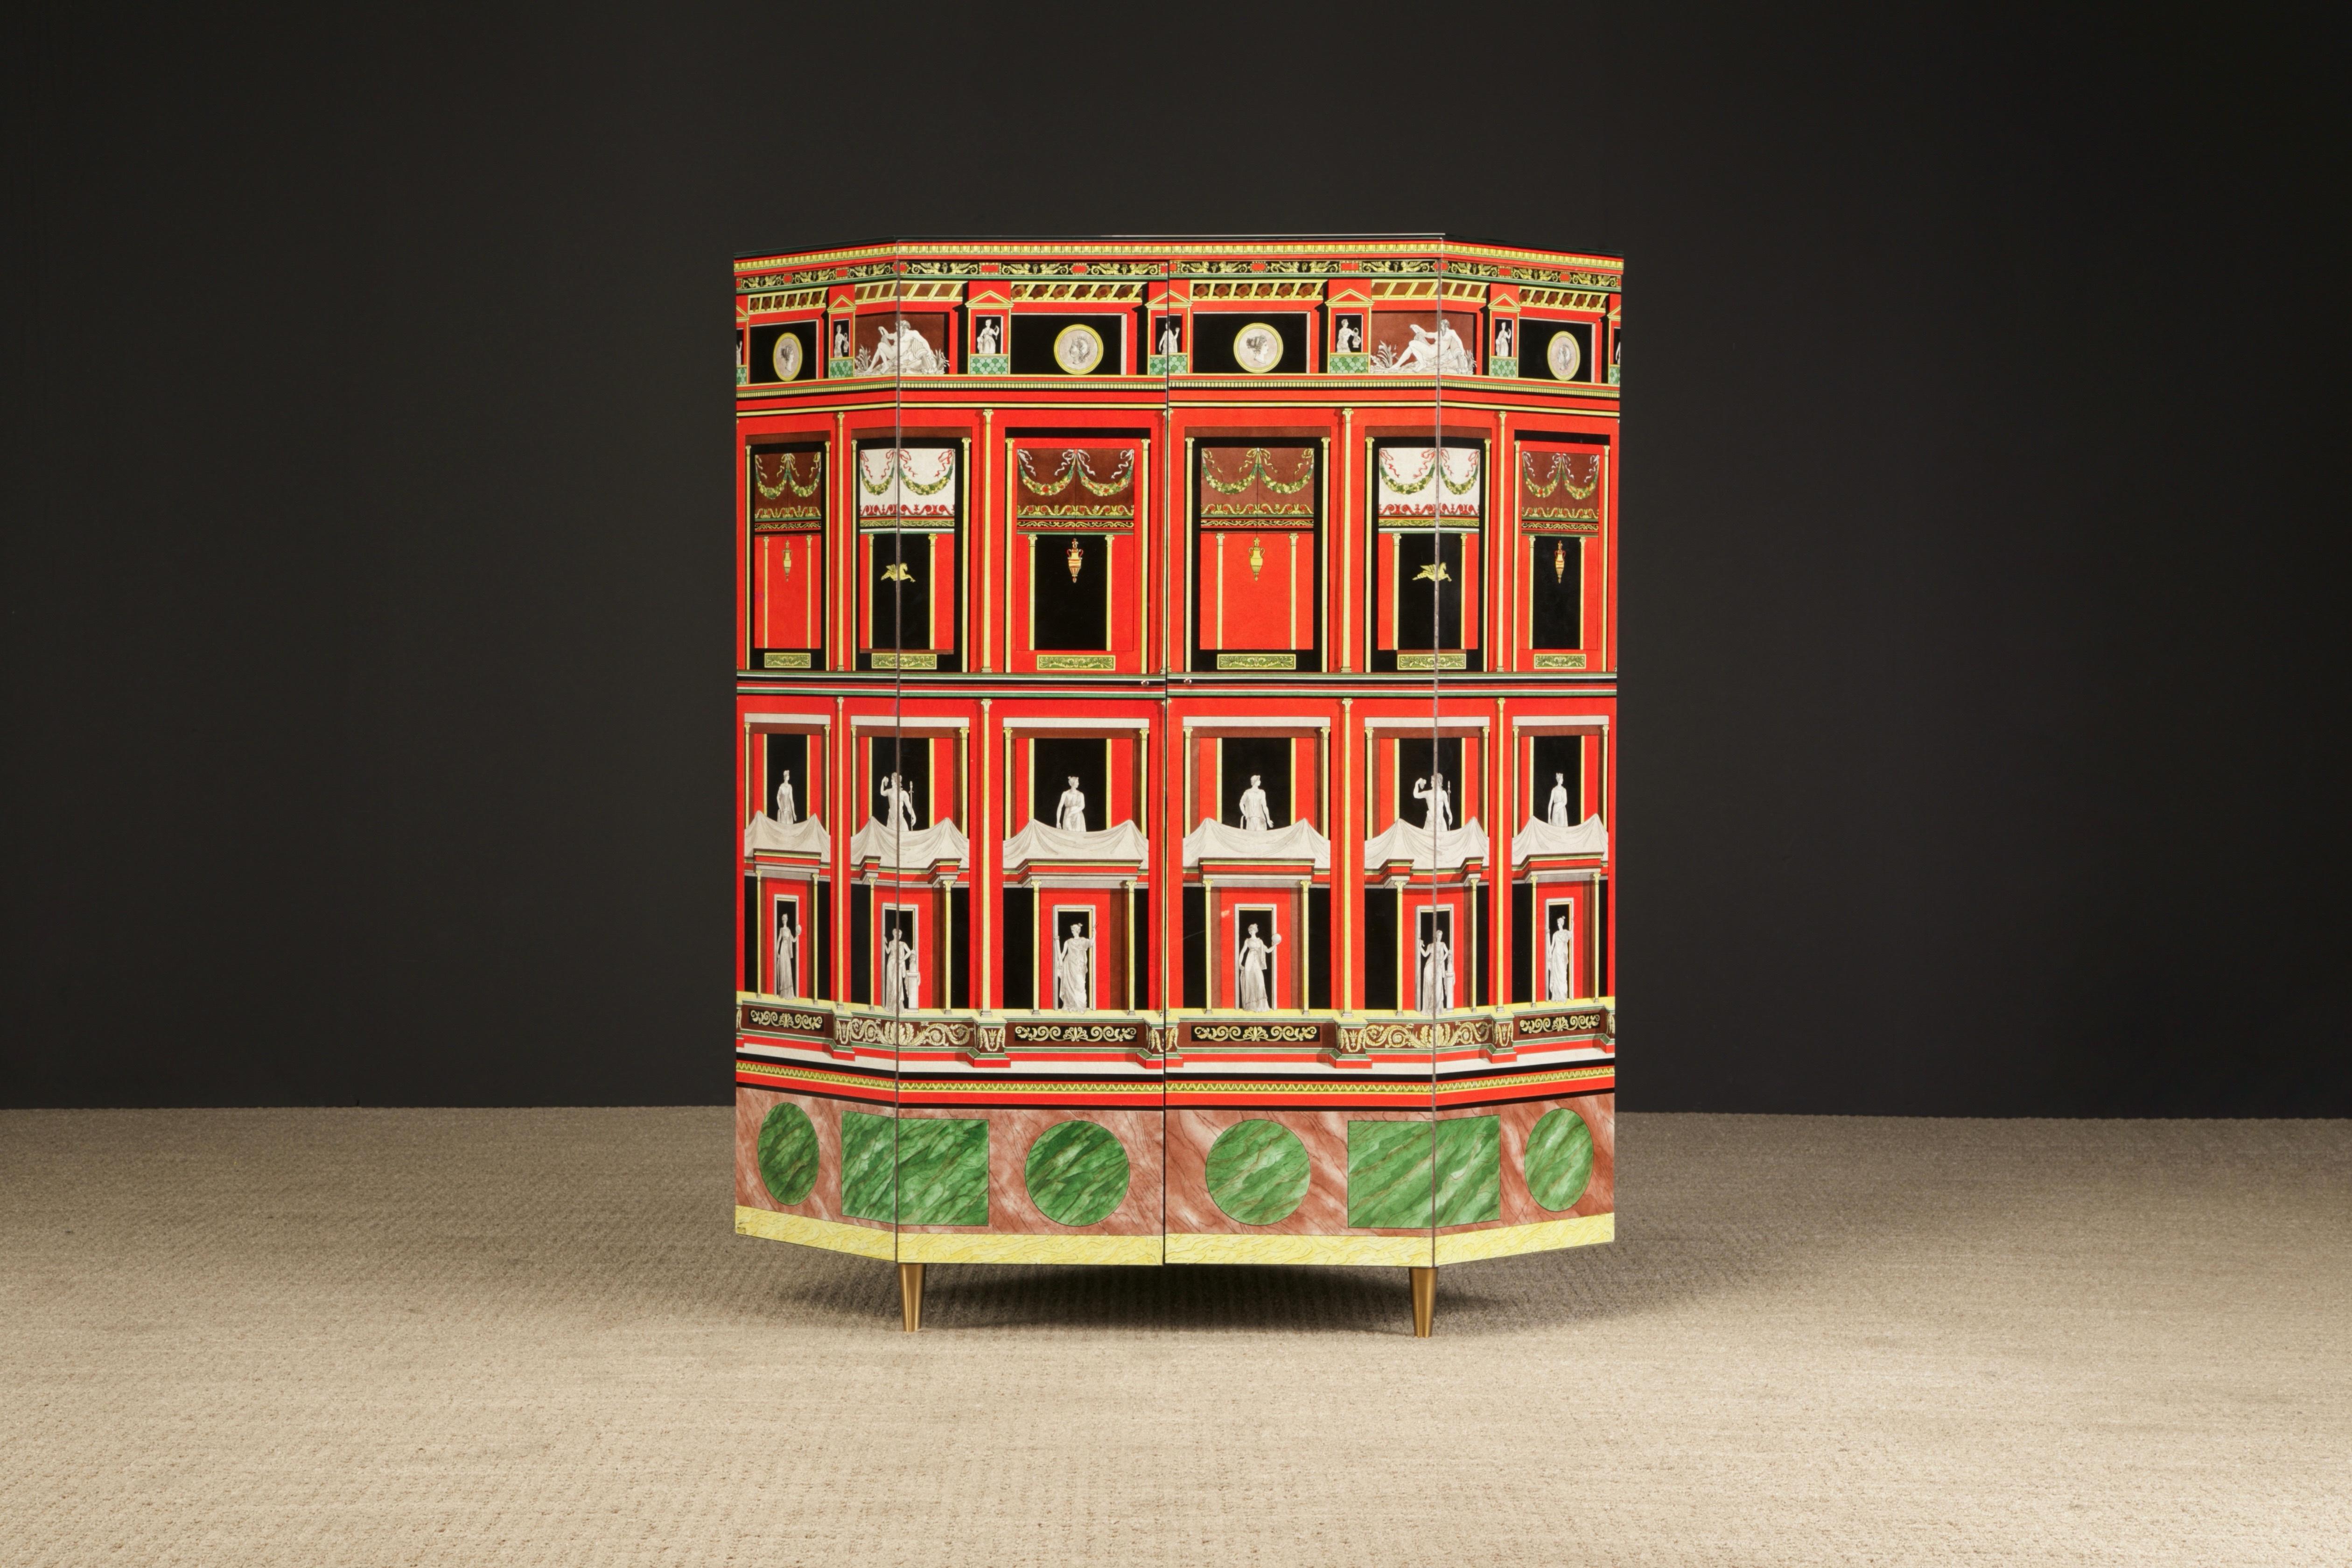 This 'much larger than it looks' collectors item is the 'Pompeiana' corner cabinet by Piero Fornasetti, completed in 1988, signed, dated and numbered 2 of 2.  Fornasetti cabinets, especially corner cabinets, are extremely rare as production was